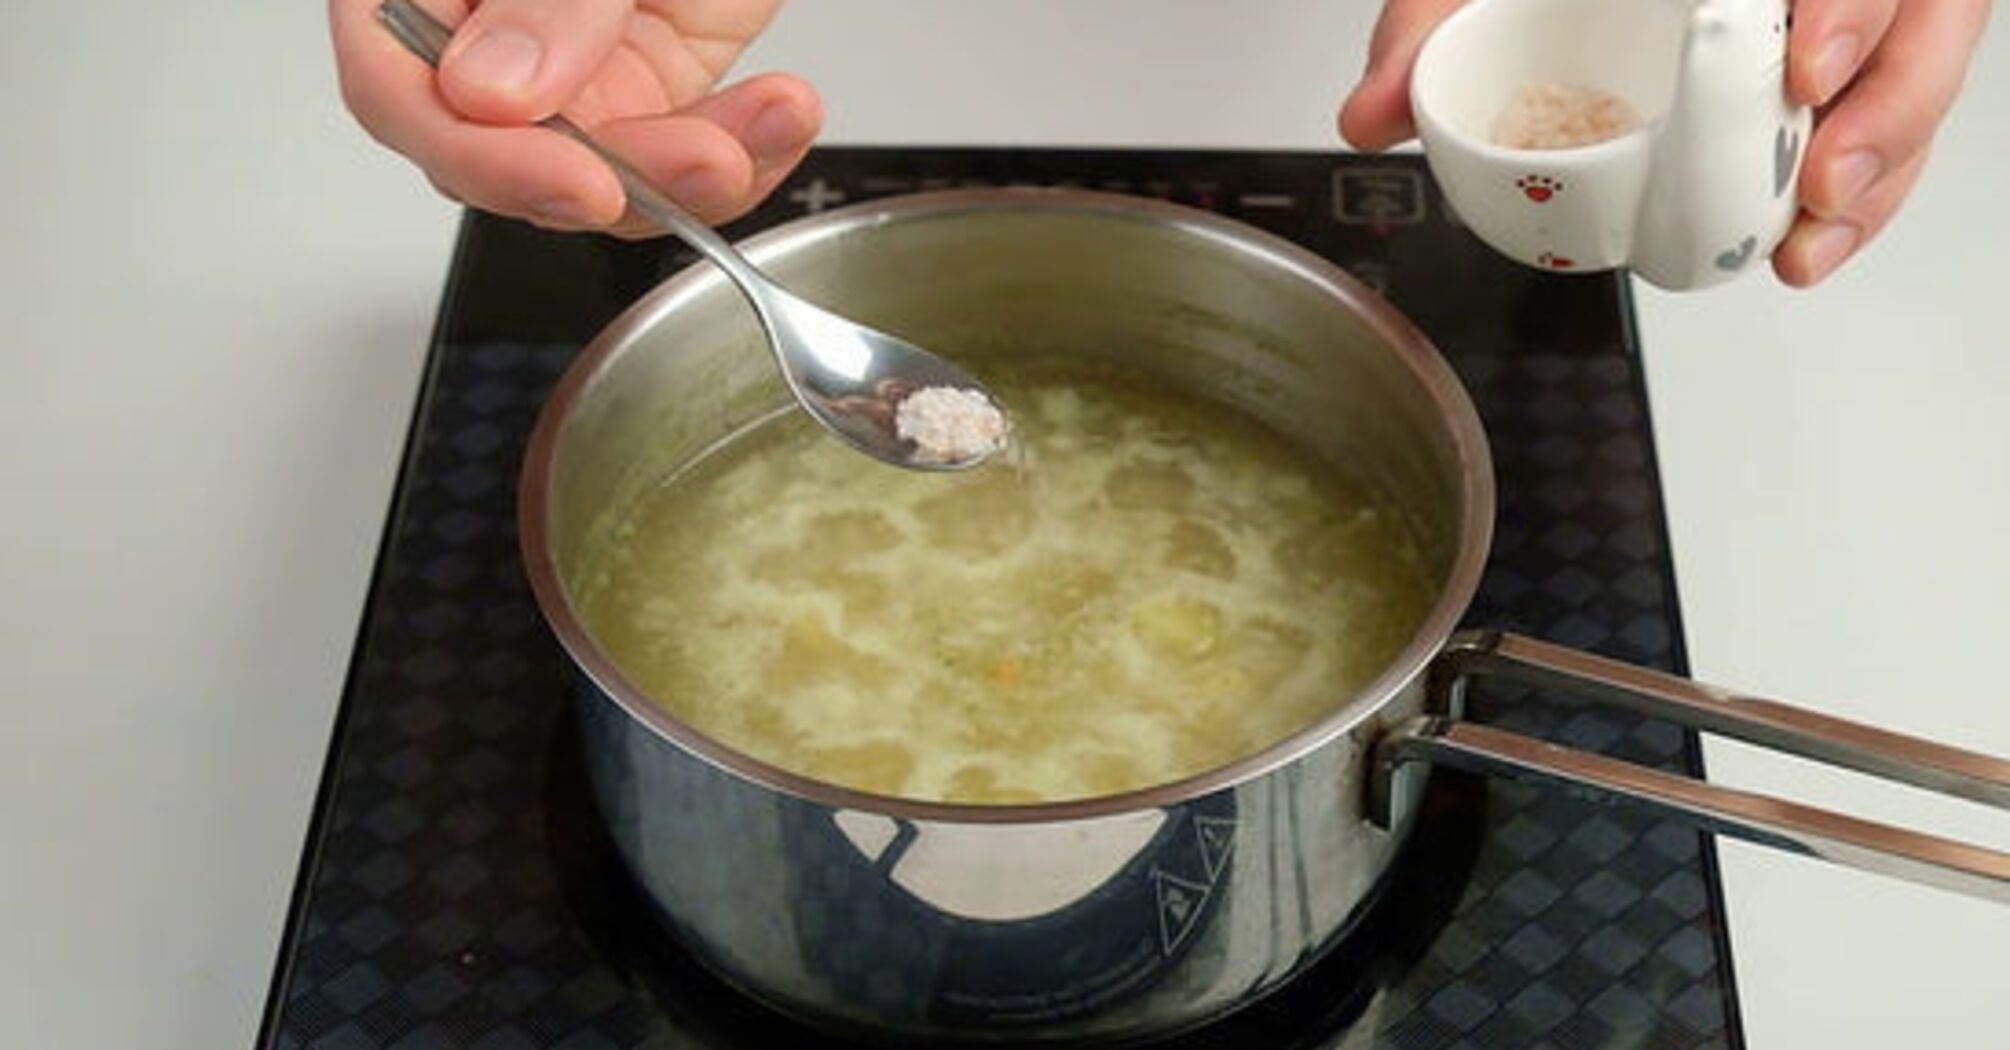 How to rescue oversalted soup